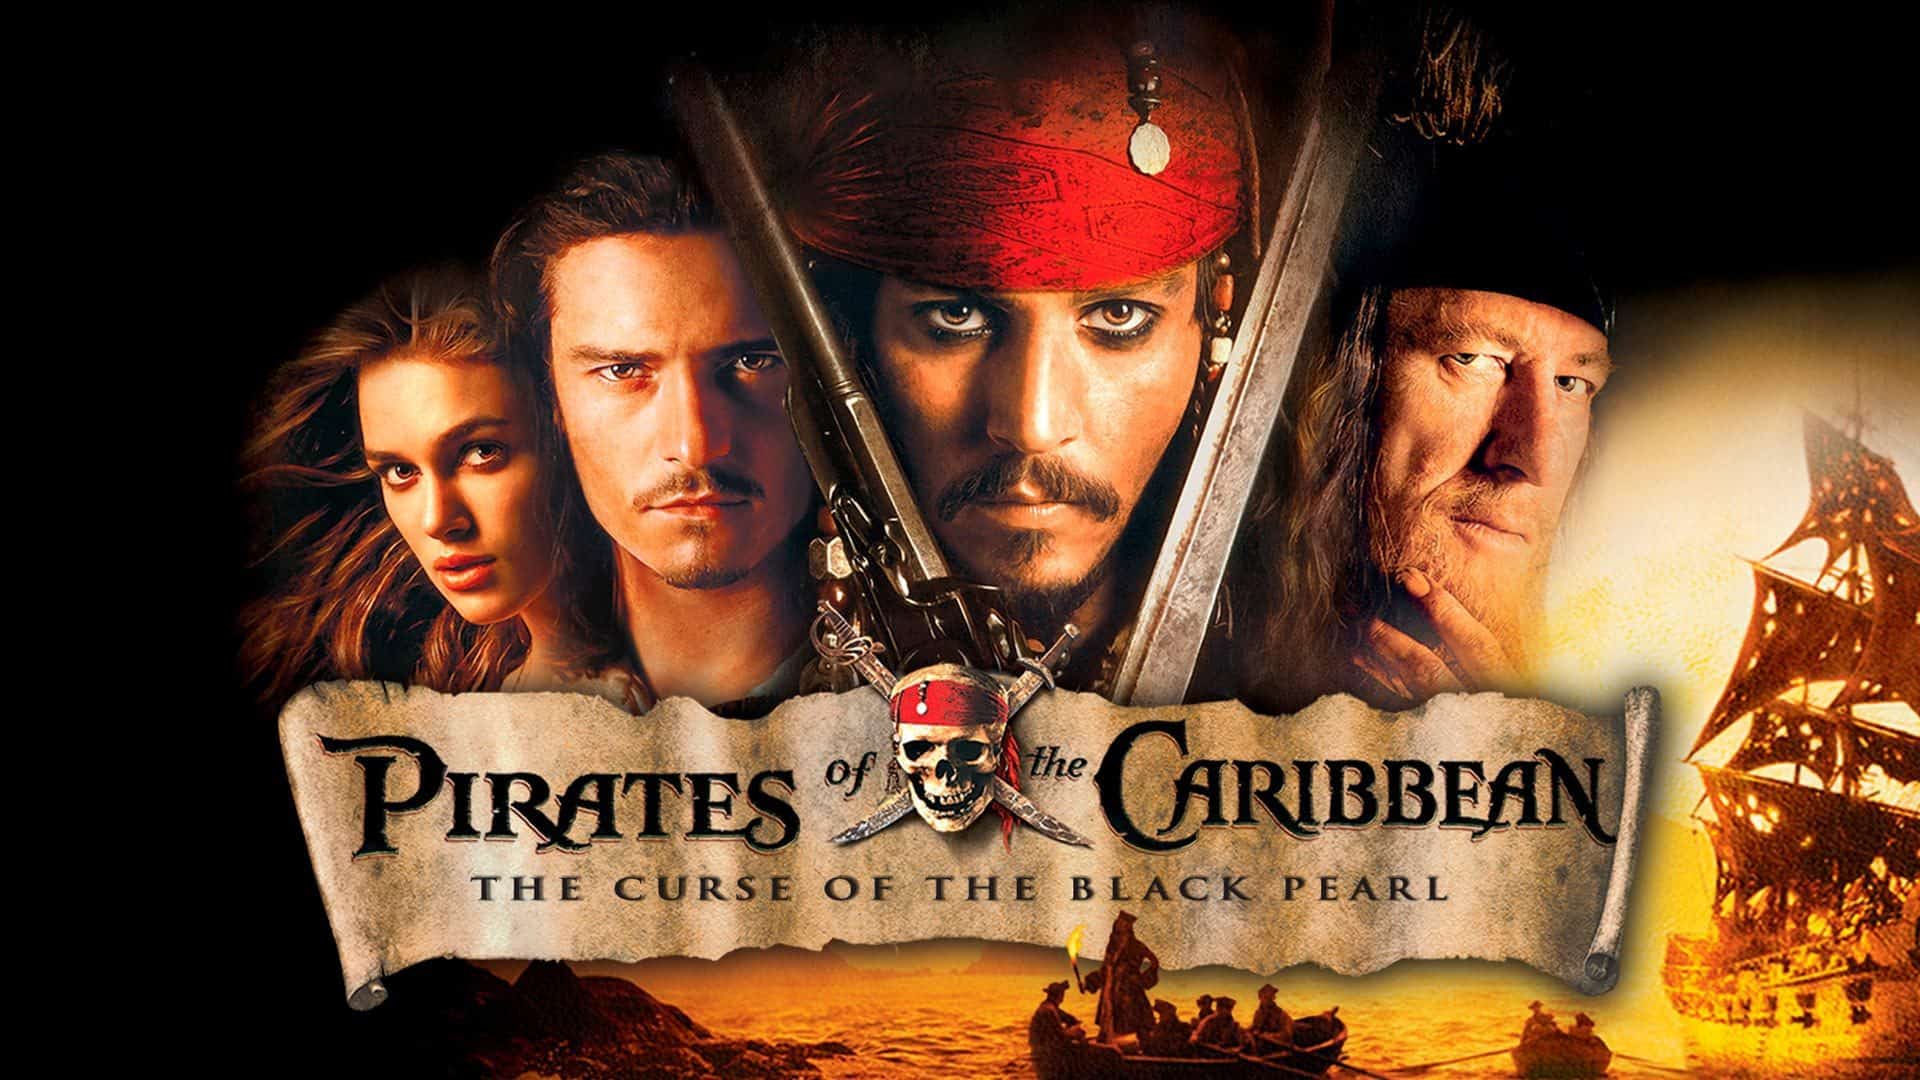 Pirates of the Caribbean: The Curse of the Black Pearl (2003) (Credits: Radio Times)